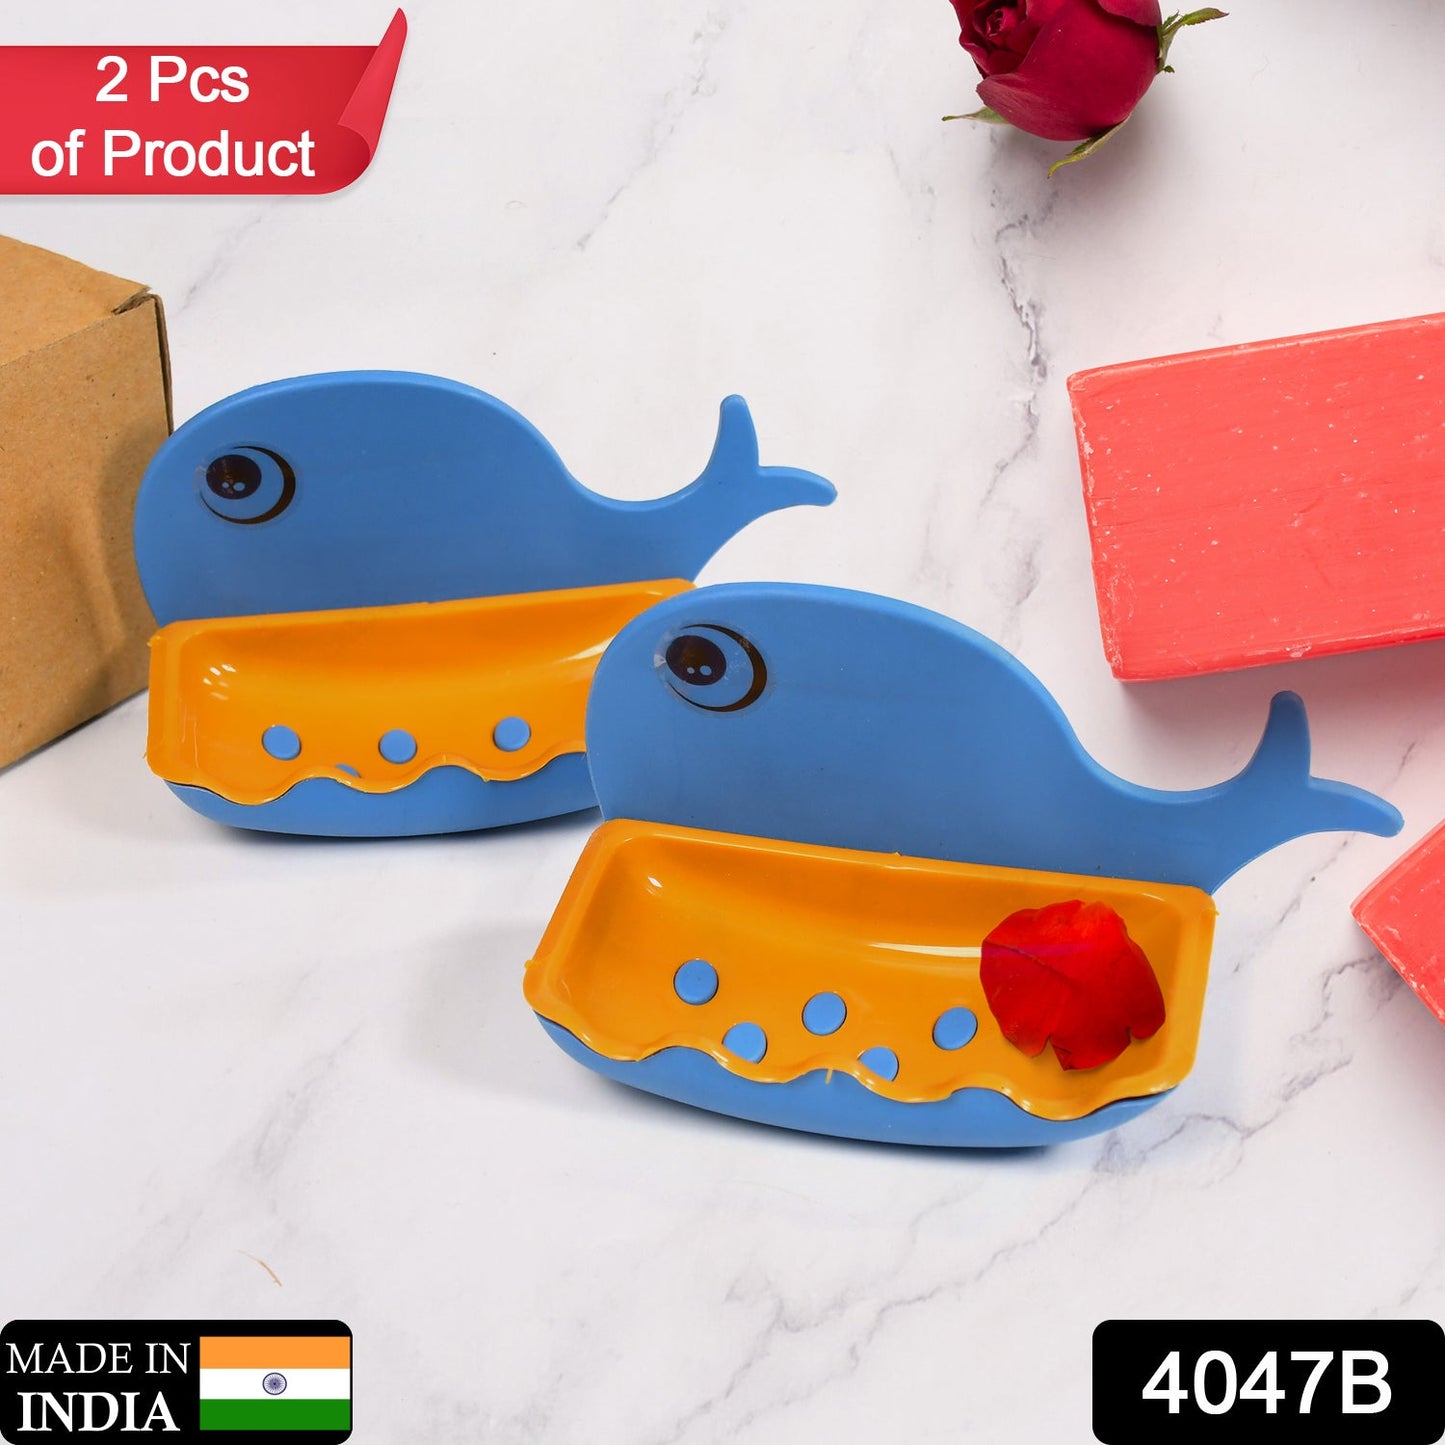 4047B Fish Shape Double Layer Adhesive Waterproof Wall Mounted Soap Bar Holder Stand Rack for Bathroom Shower Wall Kitchen ( Set Of 2 Pc ) - SWASTIK CREATIONS The Trend Point SWASTIK CREATIONS The Trend Point